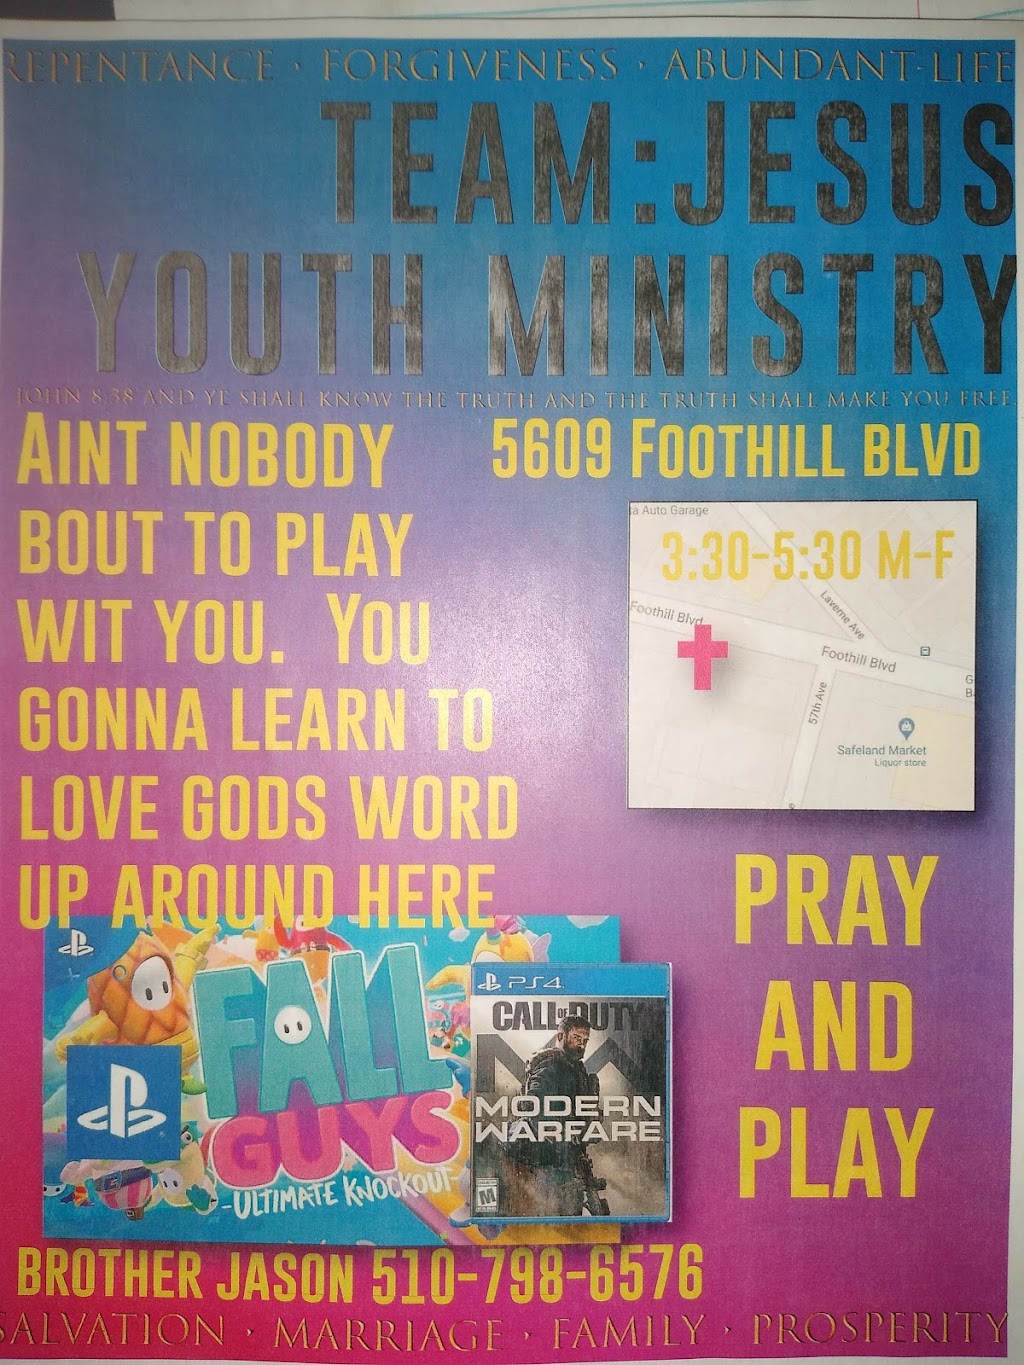 Team: Lord Jesus Christ, Youth Ministries | 5609 Foothill Blvd, Oakland, CA 94605 | Phone: (510) 798-6576